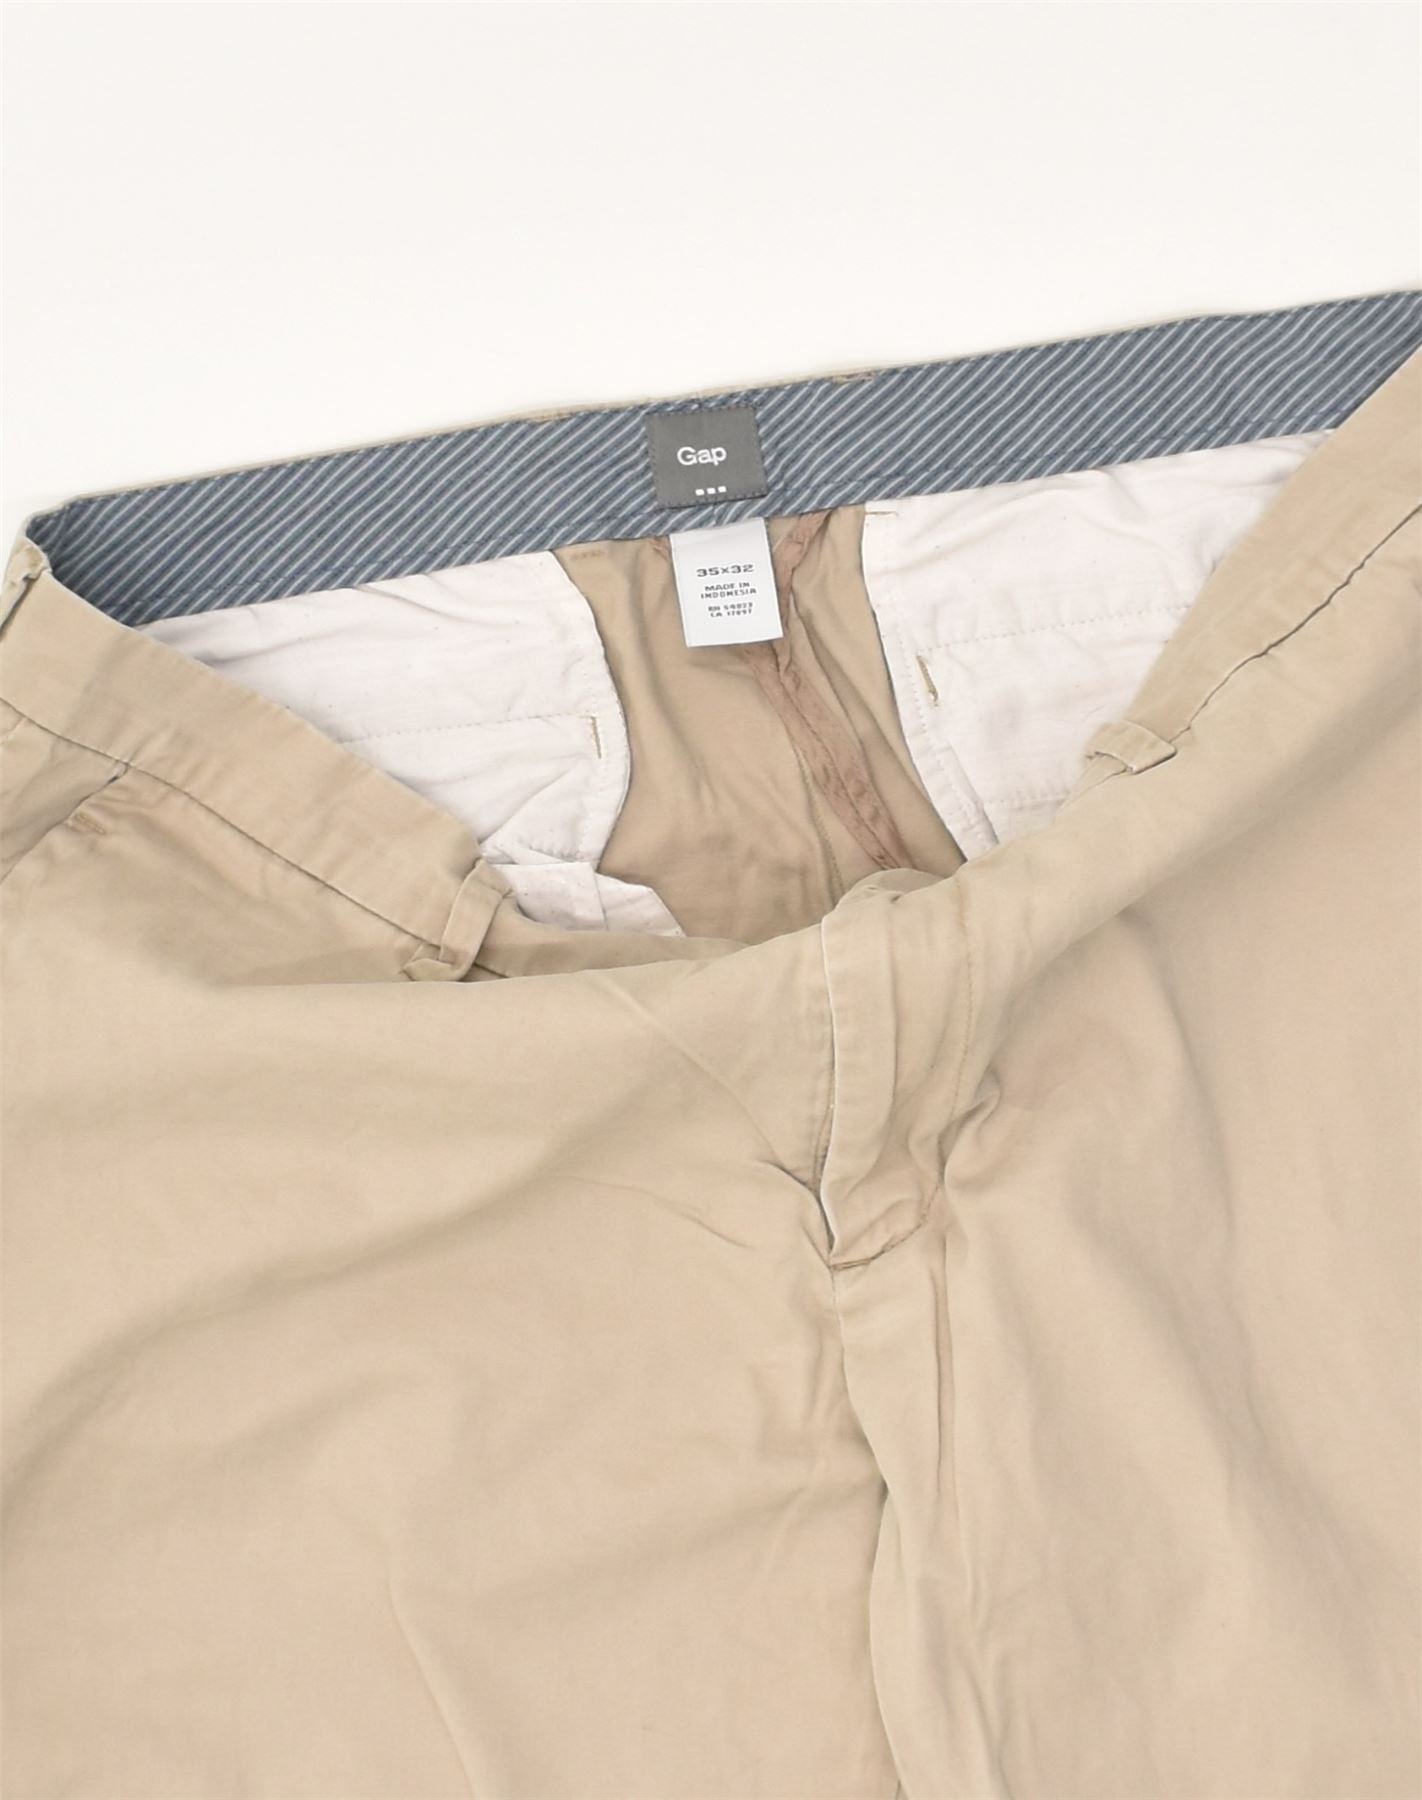 Gap | Ankle pants outfit, Pants outfit men, Mens outfits